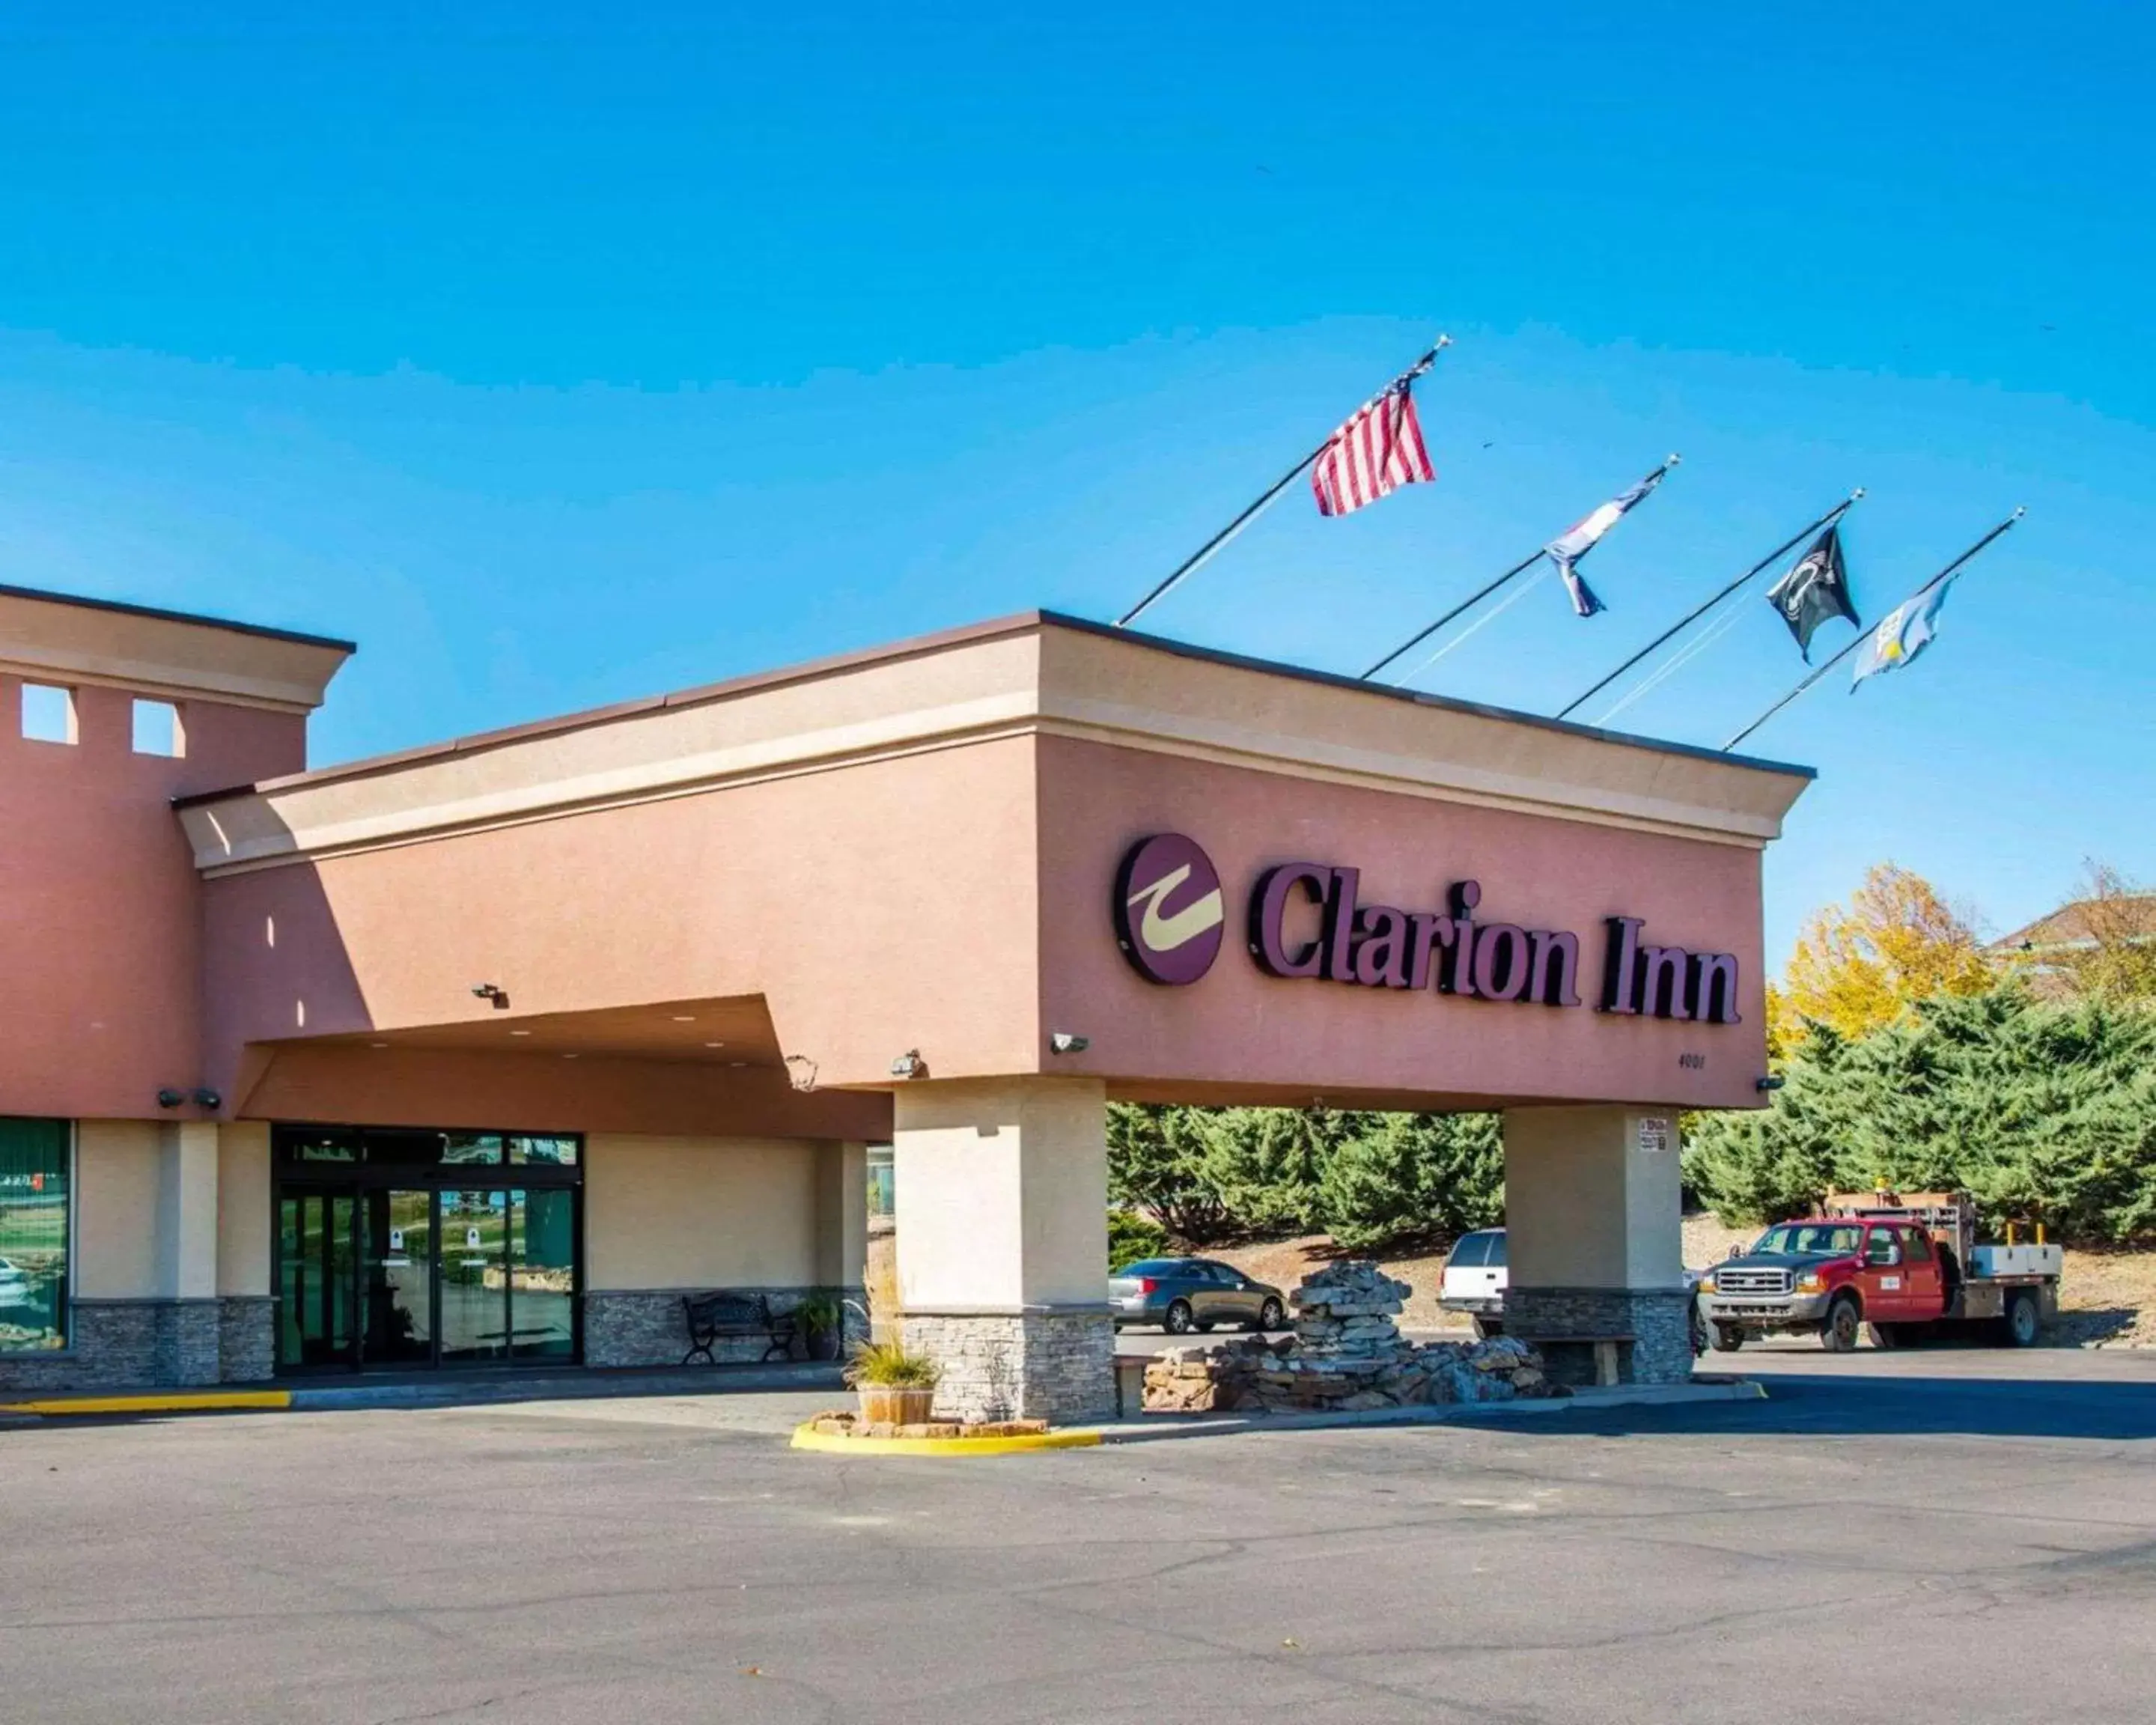 Property building in Clarion Inn and Events Center Pueblo North